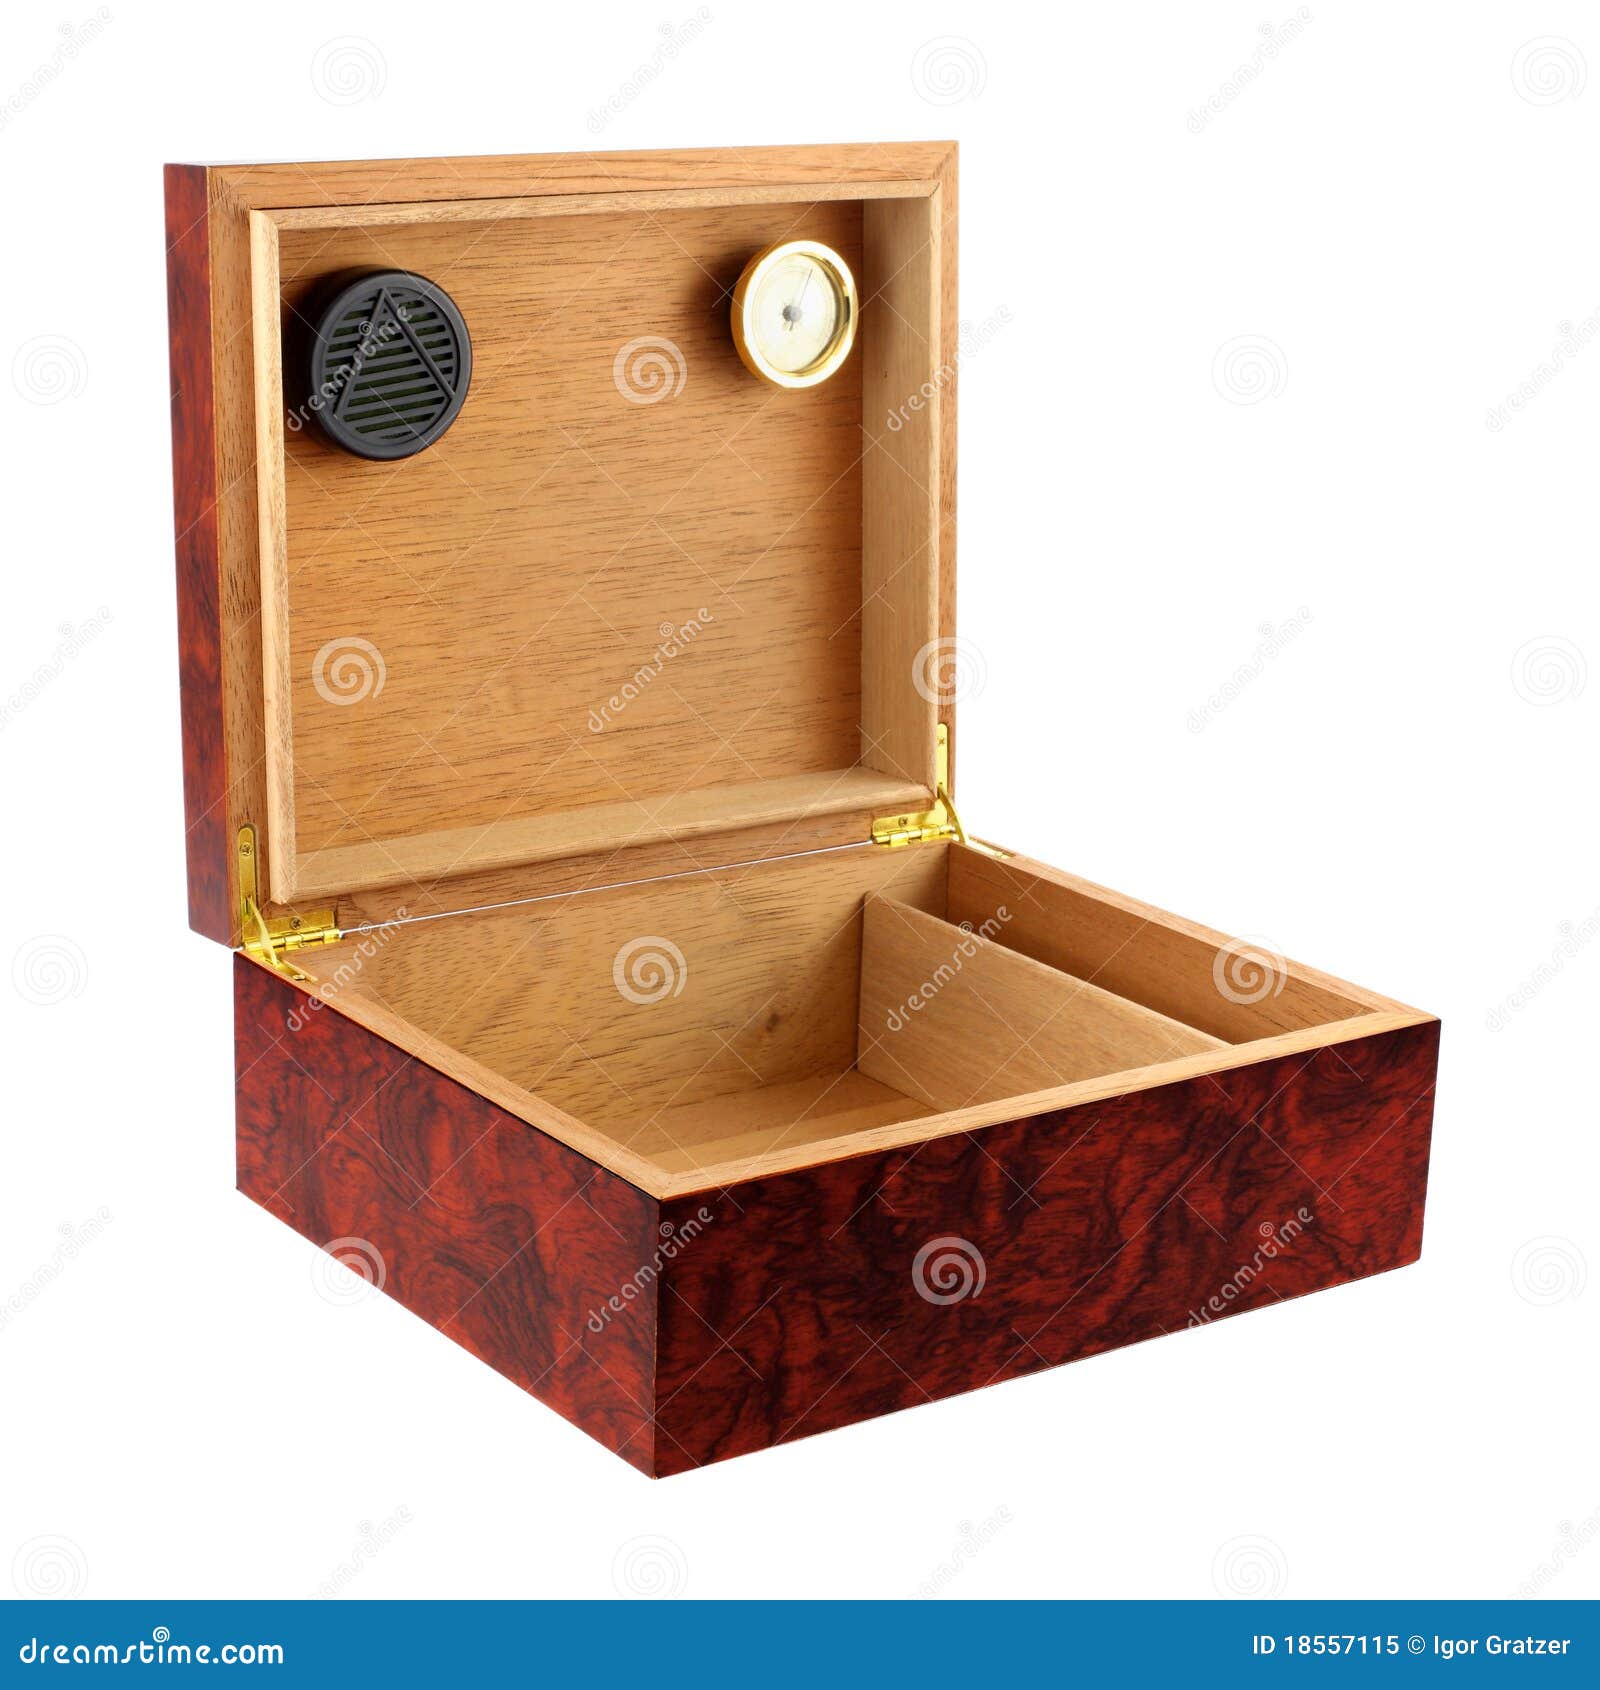 Wooden humidor for cigars isolated on white background. Intentional 